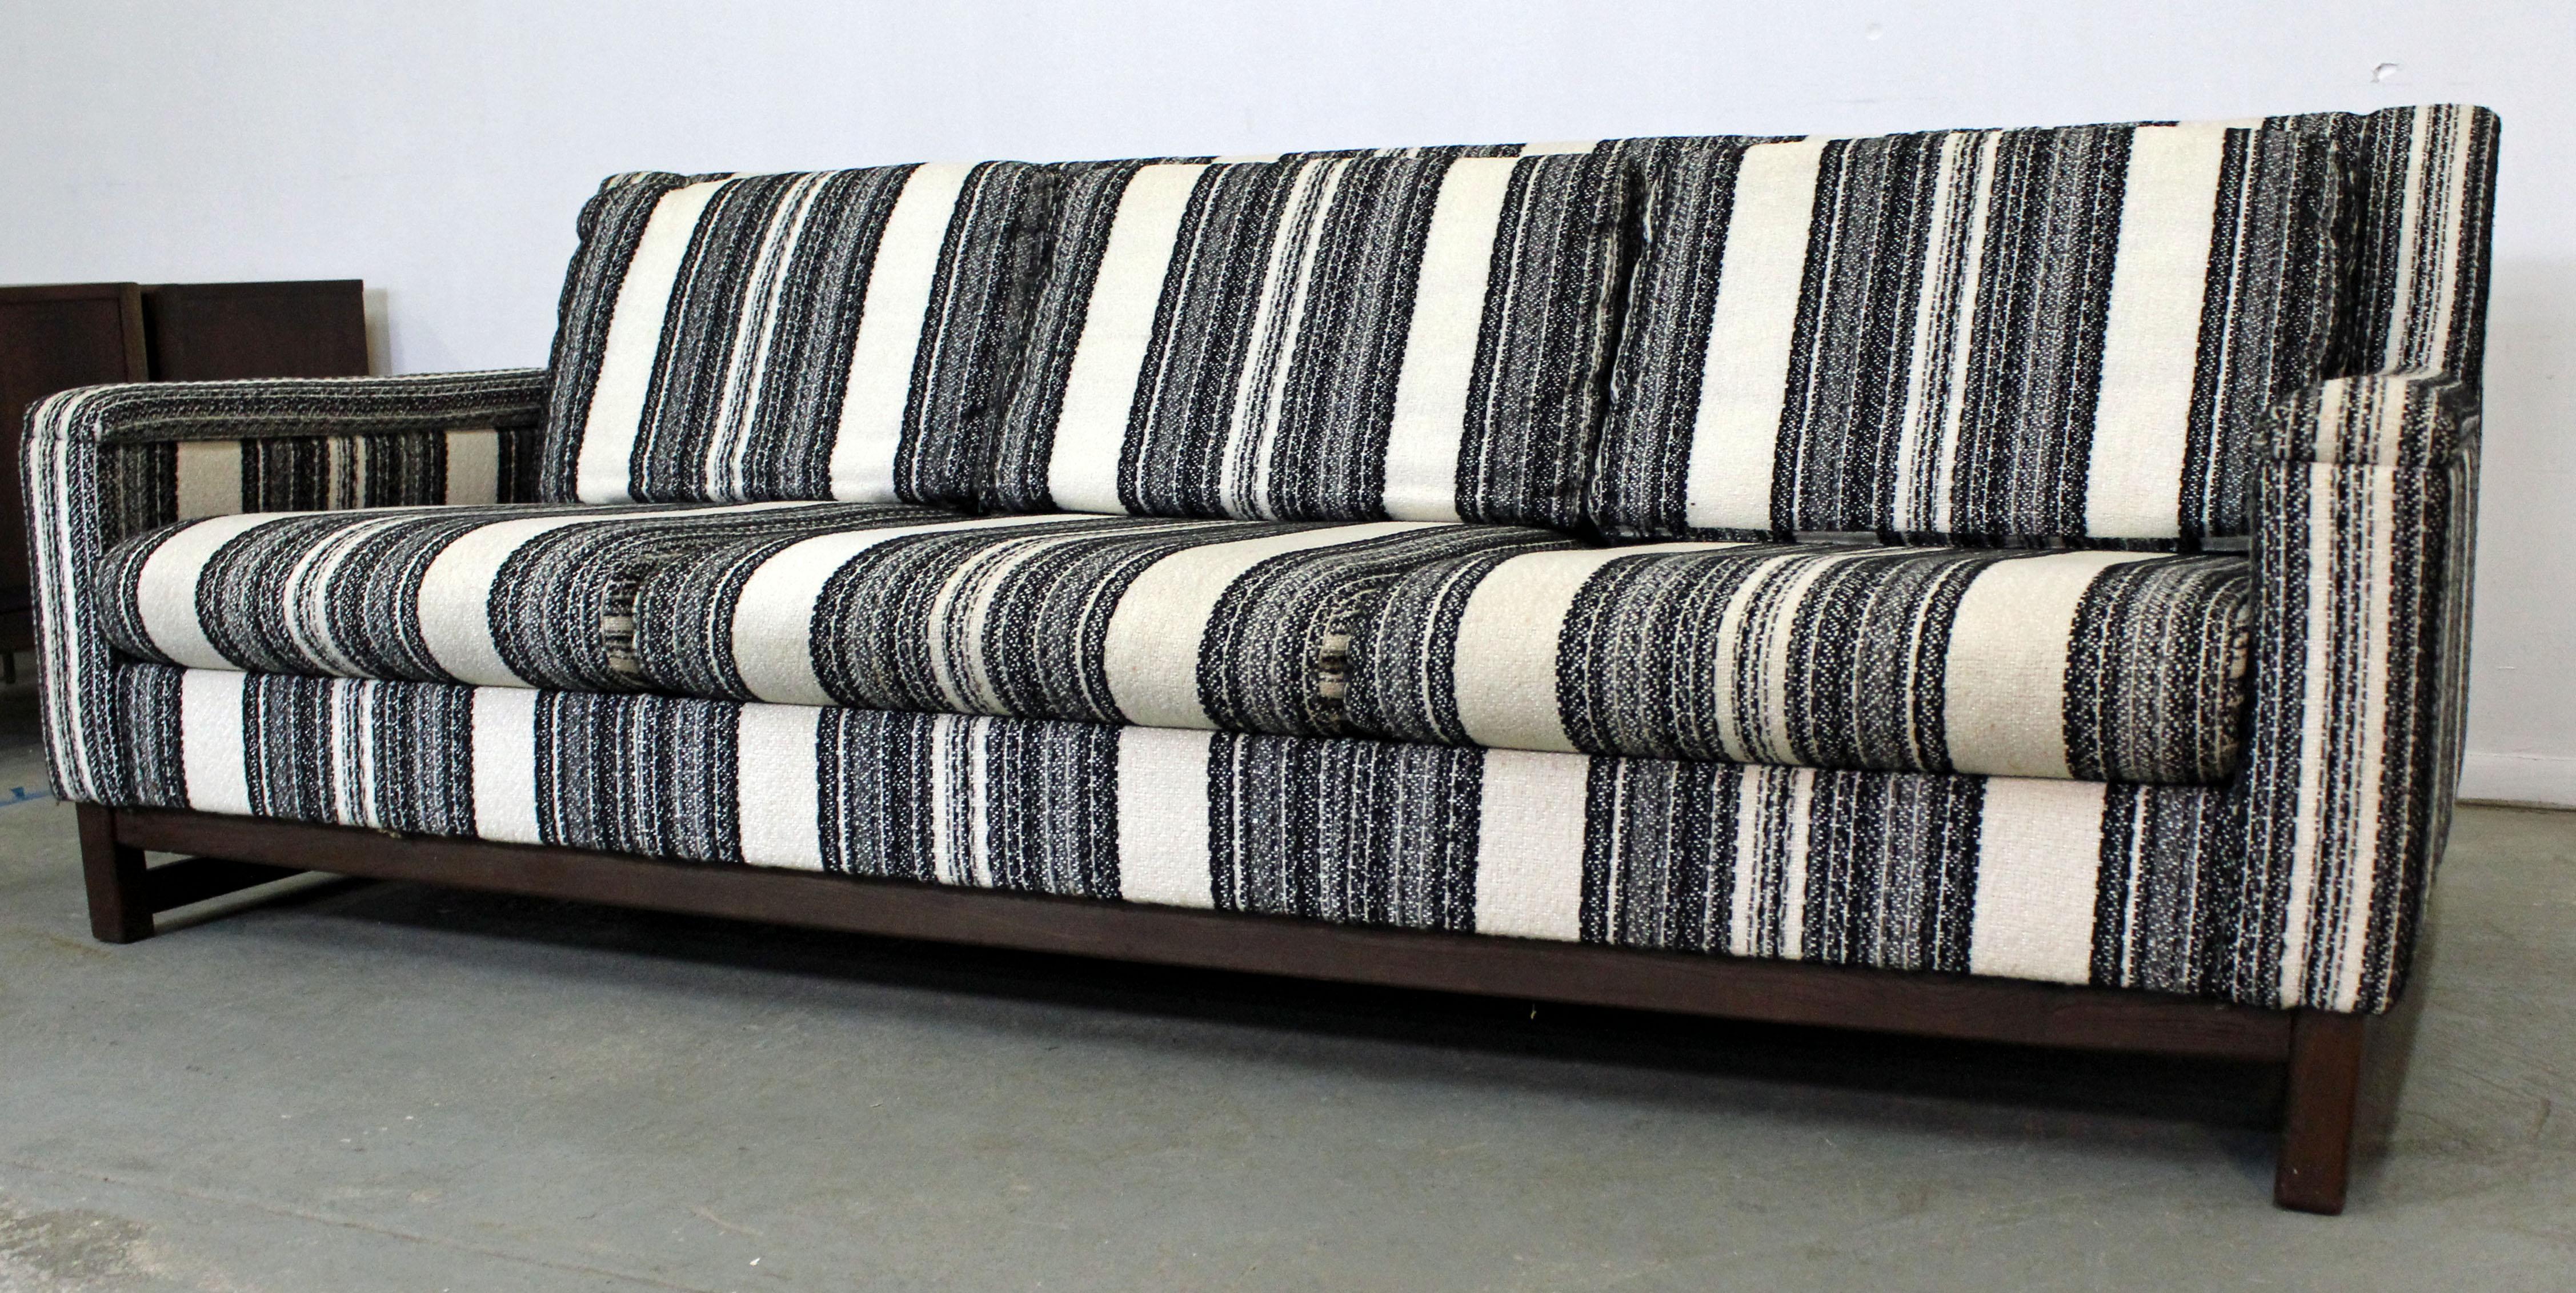 What a find. Offered is a mid-century modern sofa made by Selig Imperial. This is a three-seater with striped upholstery and wooden legs. It is in good condition for its age with some wear including very light stains. It is branded by Selig